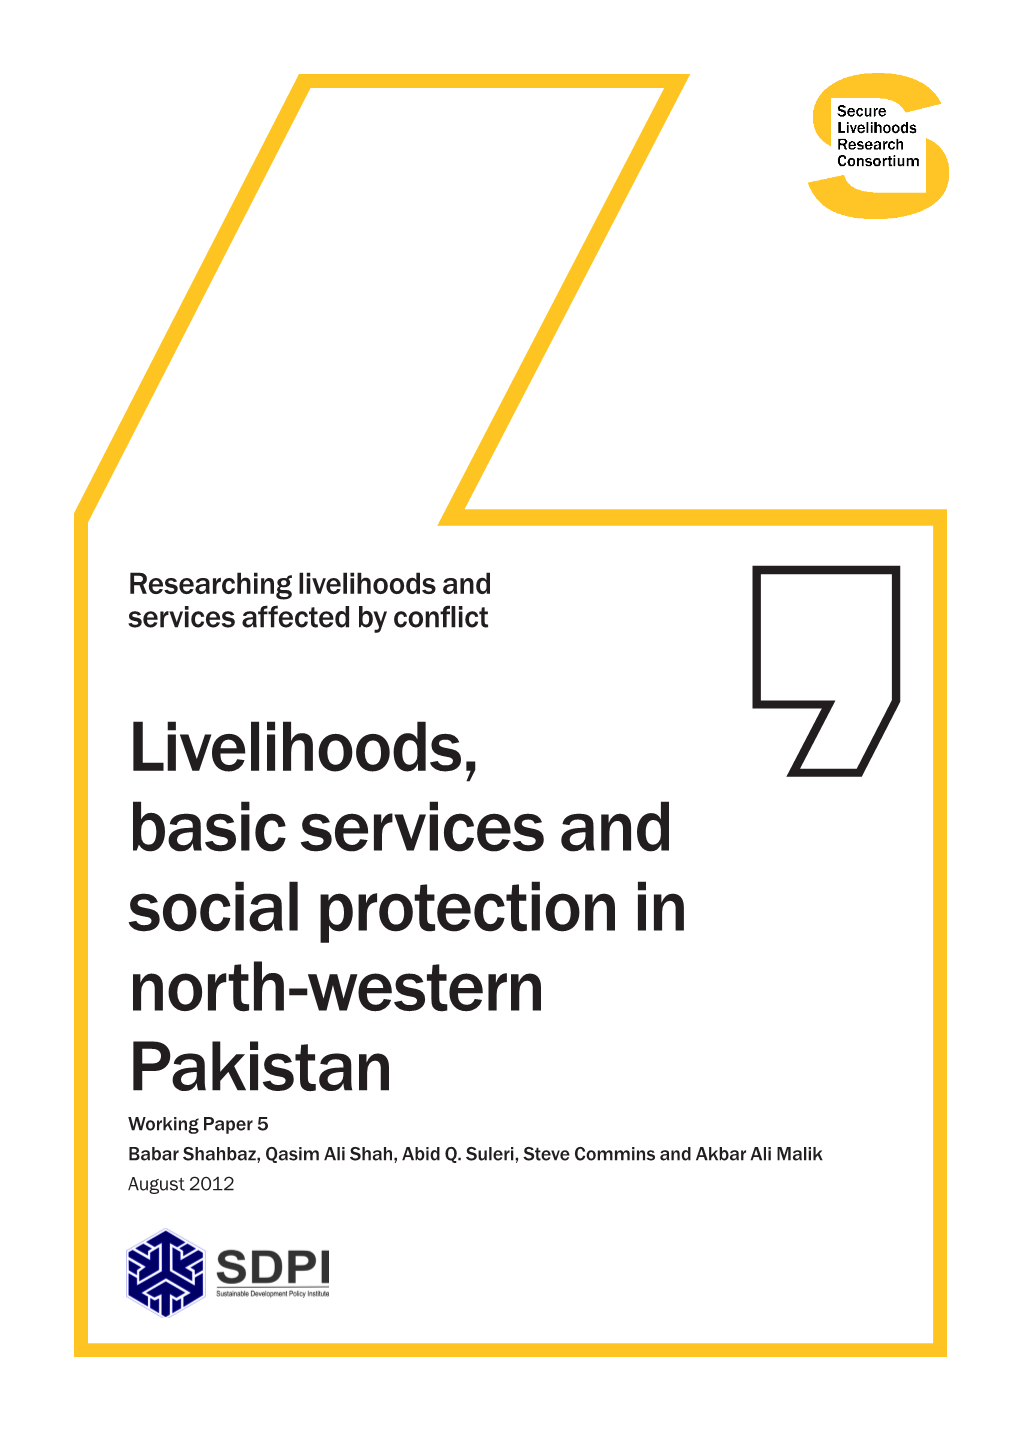 Livelihoods, Basic Services and Social Protection in North-Western Pakistan Working Paper 5 Babar Shahbaz, Qasim Ali Shah, Abid Q